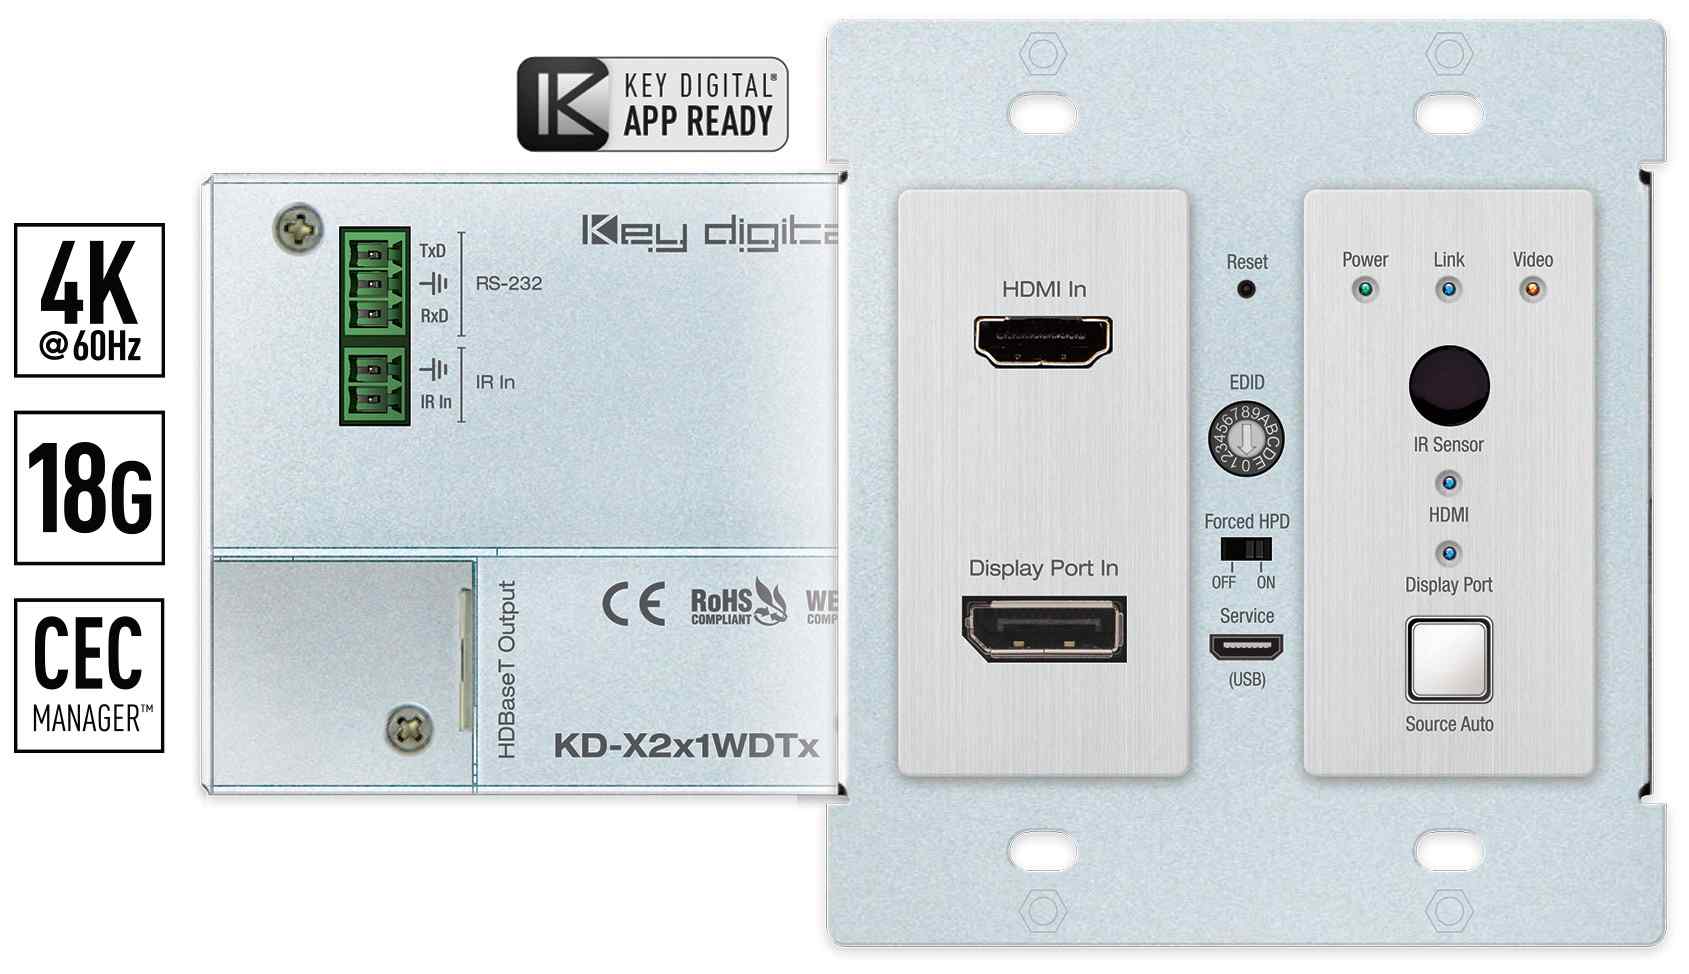 A high-quality wall plate transmitter for HDMI and Display Port signals over long distances using CAT6, with HDBaseT technology.